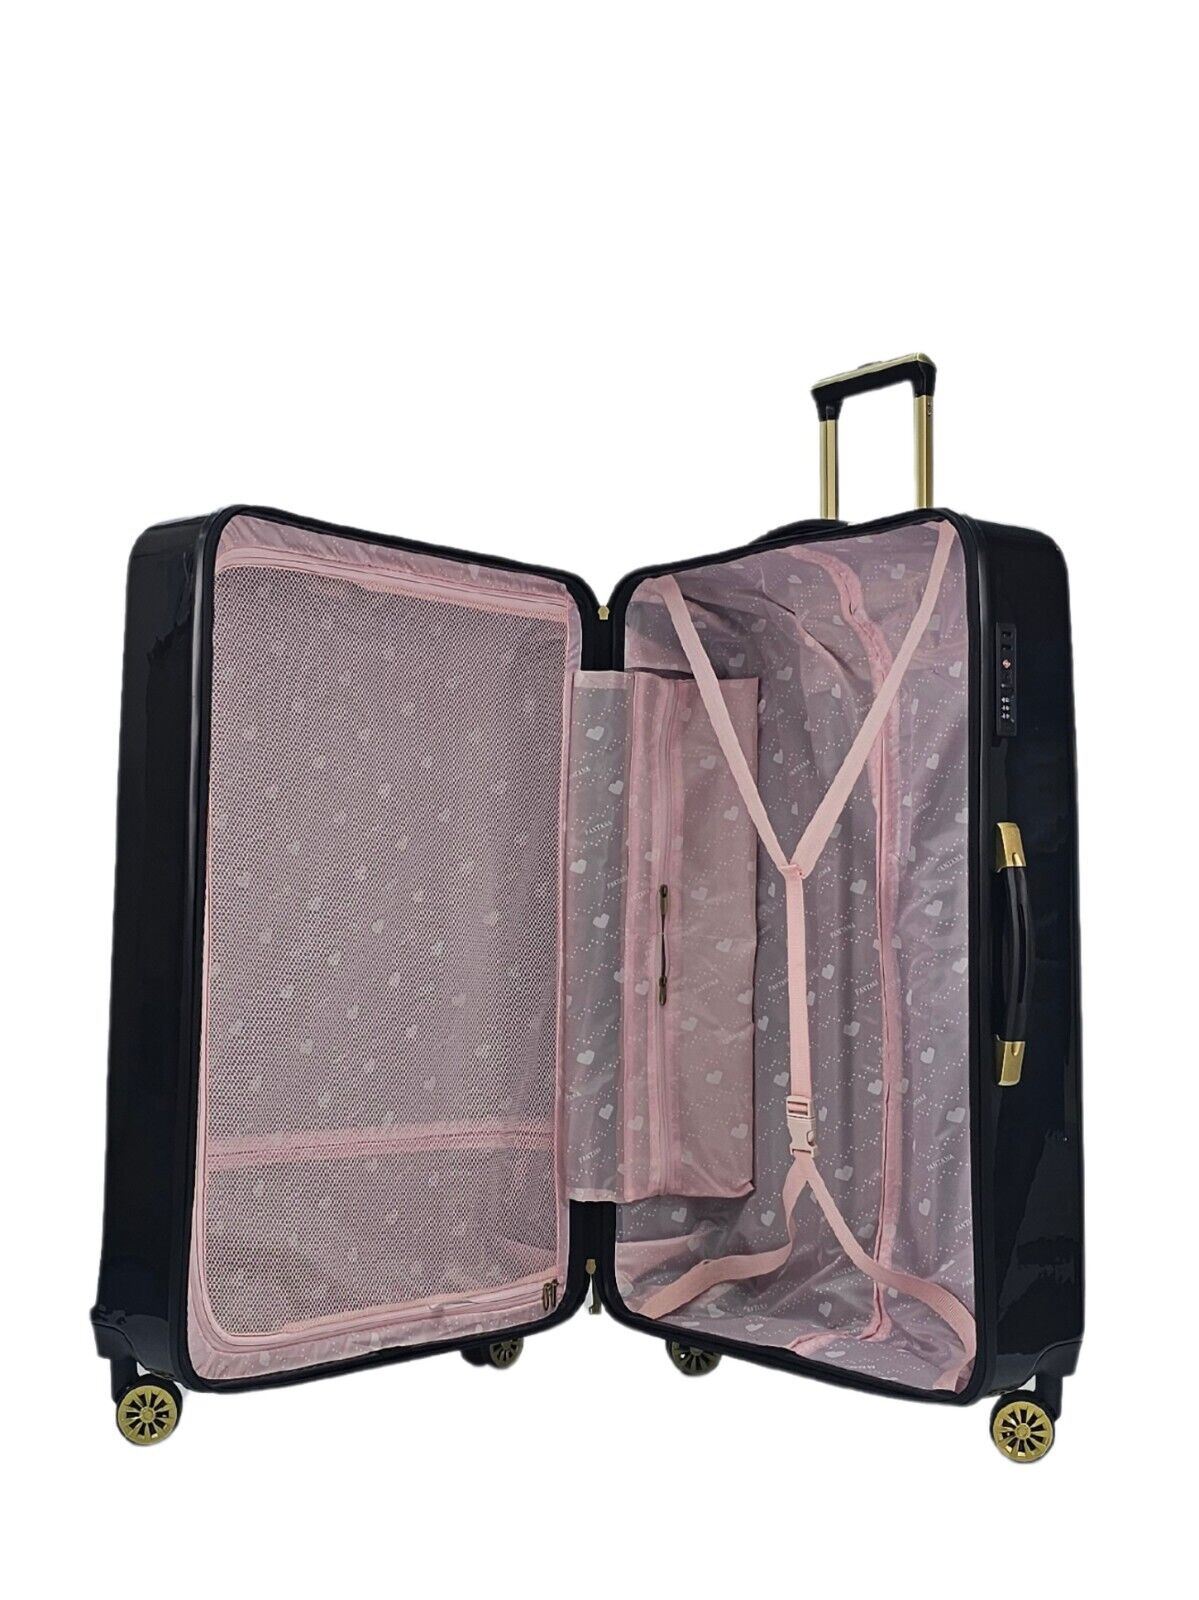 Butler Extra Large Hard Shell Suitcase in Black